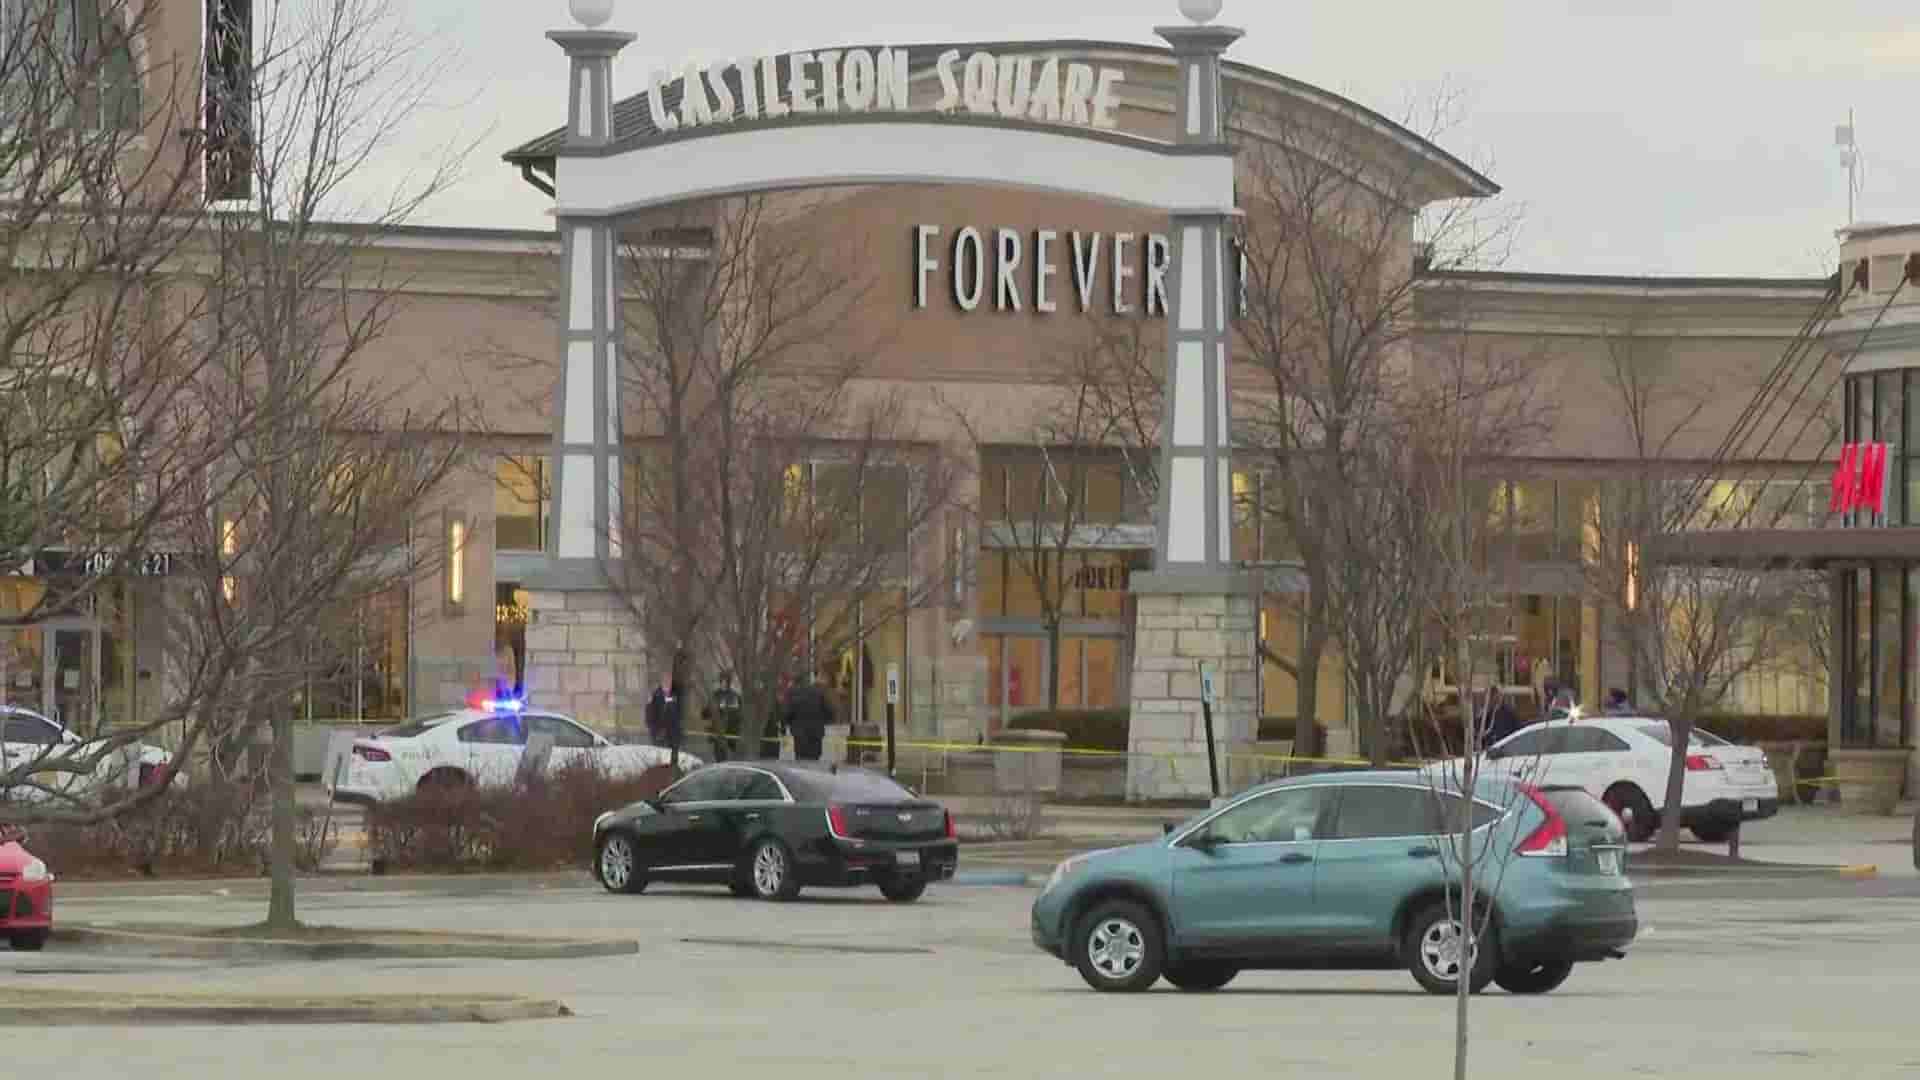 Person injured in shooting at Castleton Square Mall